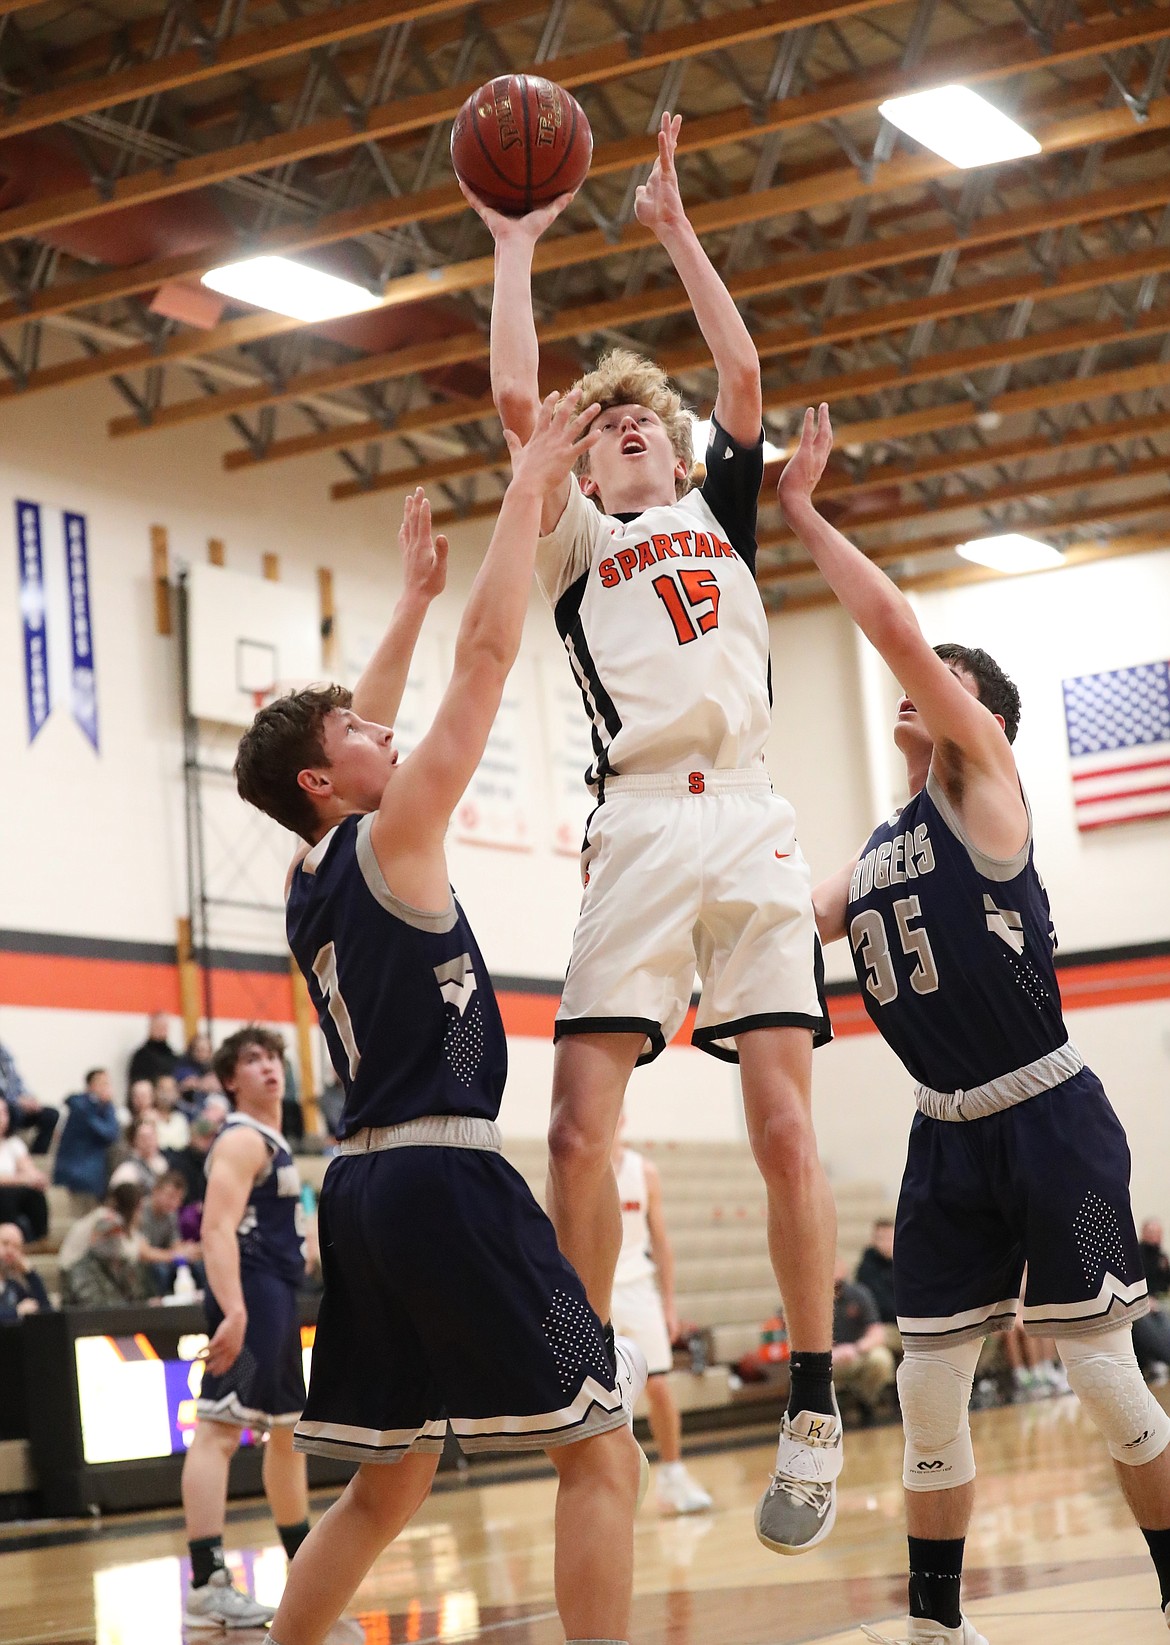 Blake Barrett elevates for a shot over a pair of Bonners Ferry defenders on Saturday.